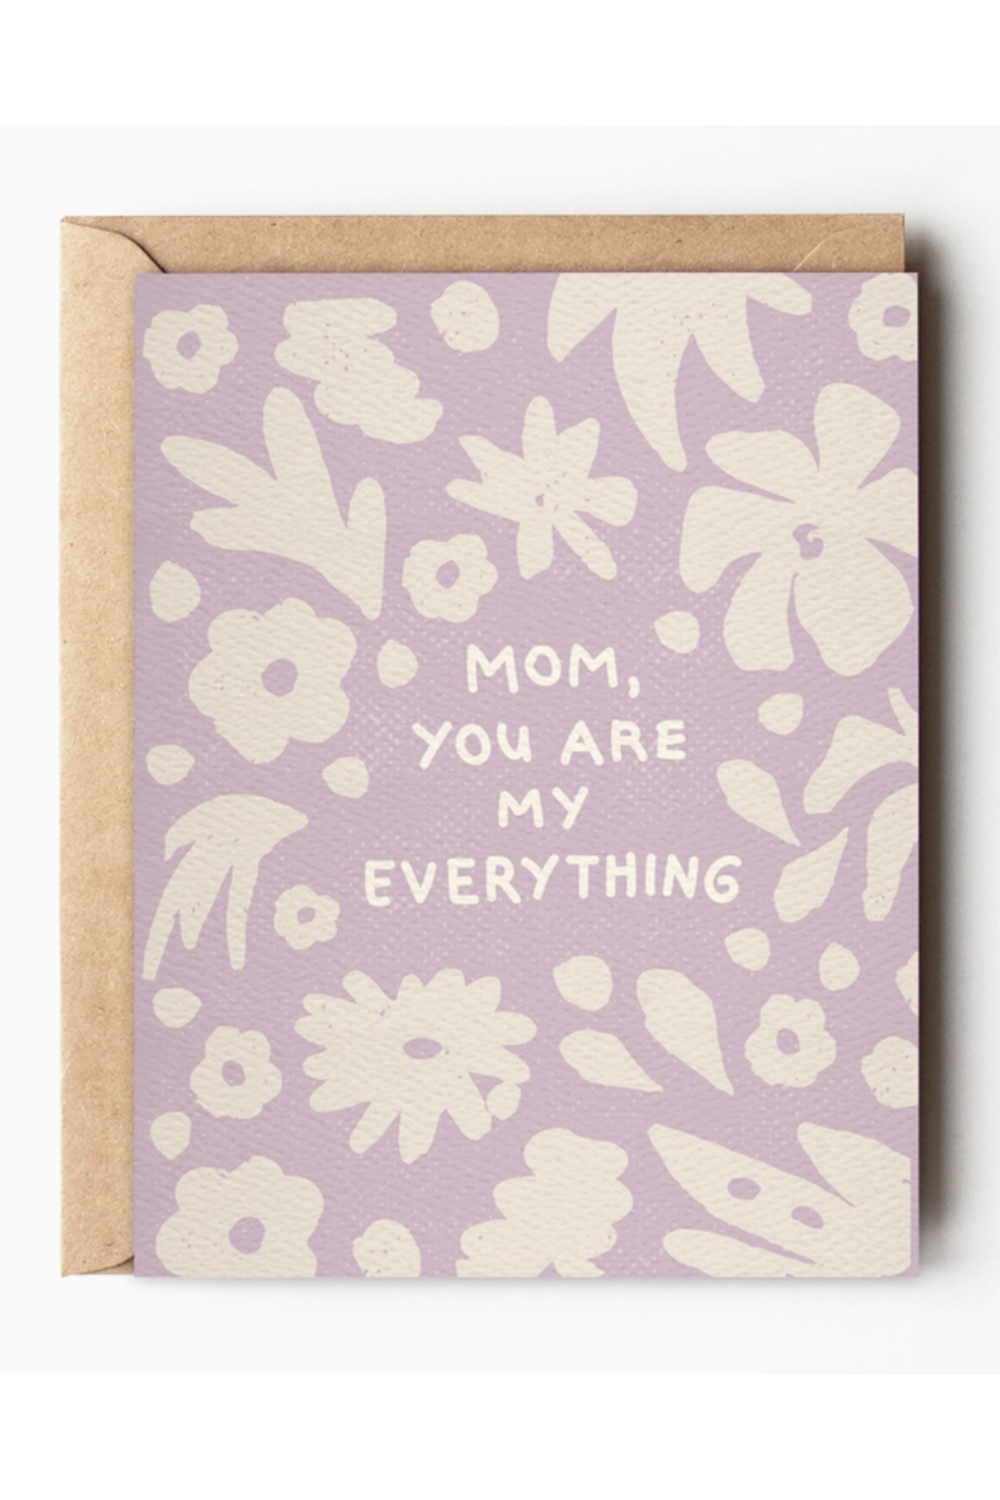 DD Mother's Day Card - You are my Everything